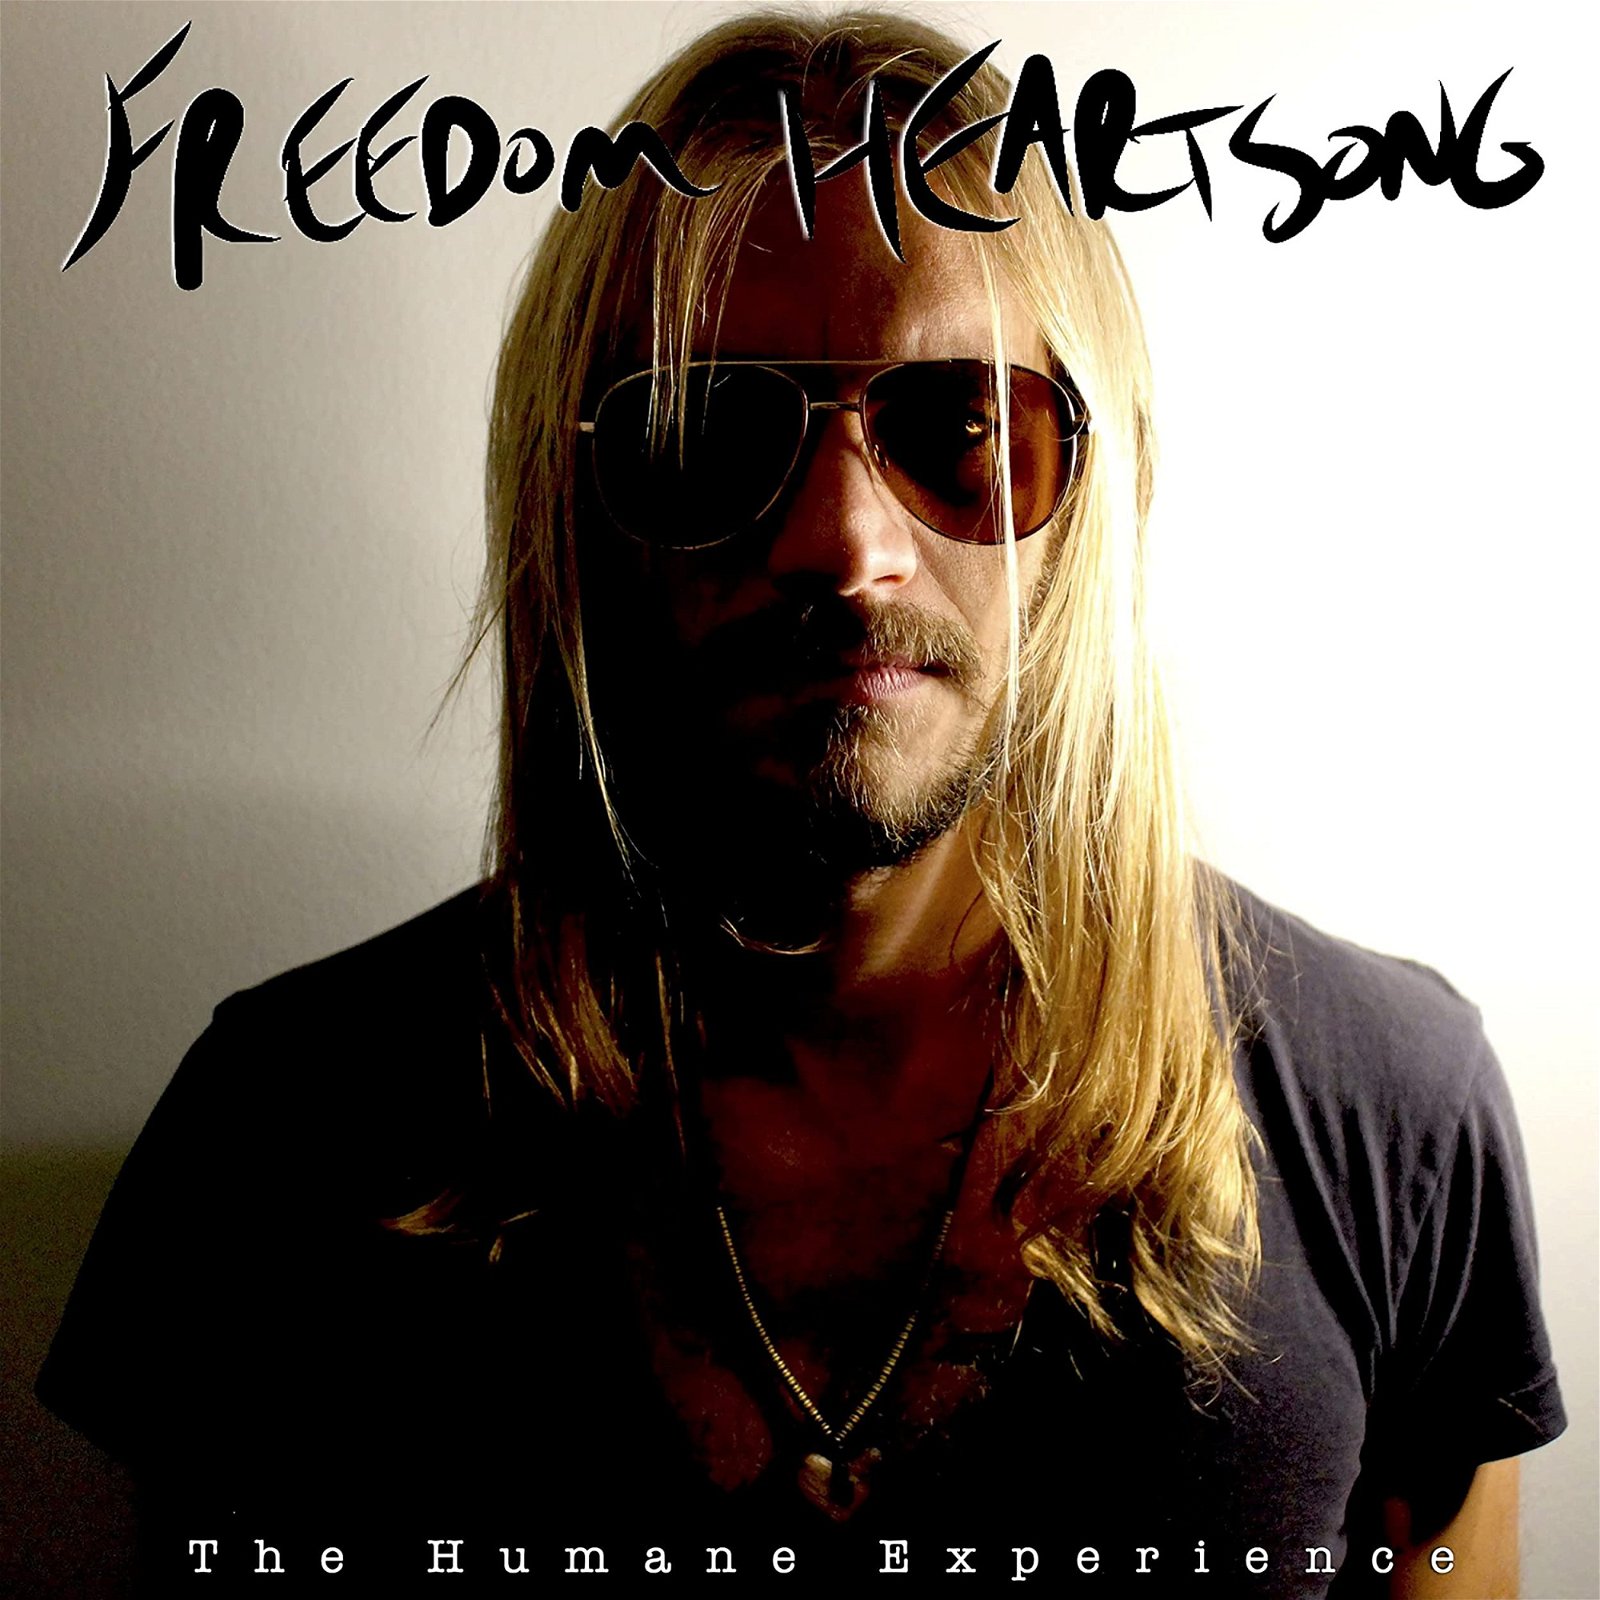 CD Shop - FREEDOM HEARTSONG HUMANE EXPERIENCE